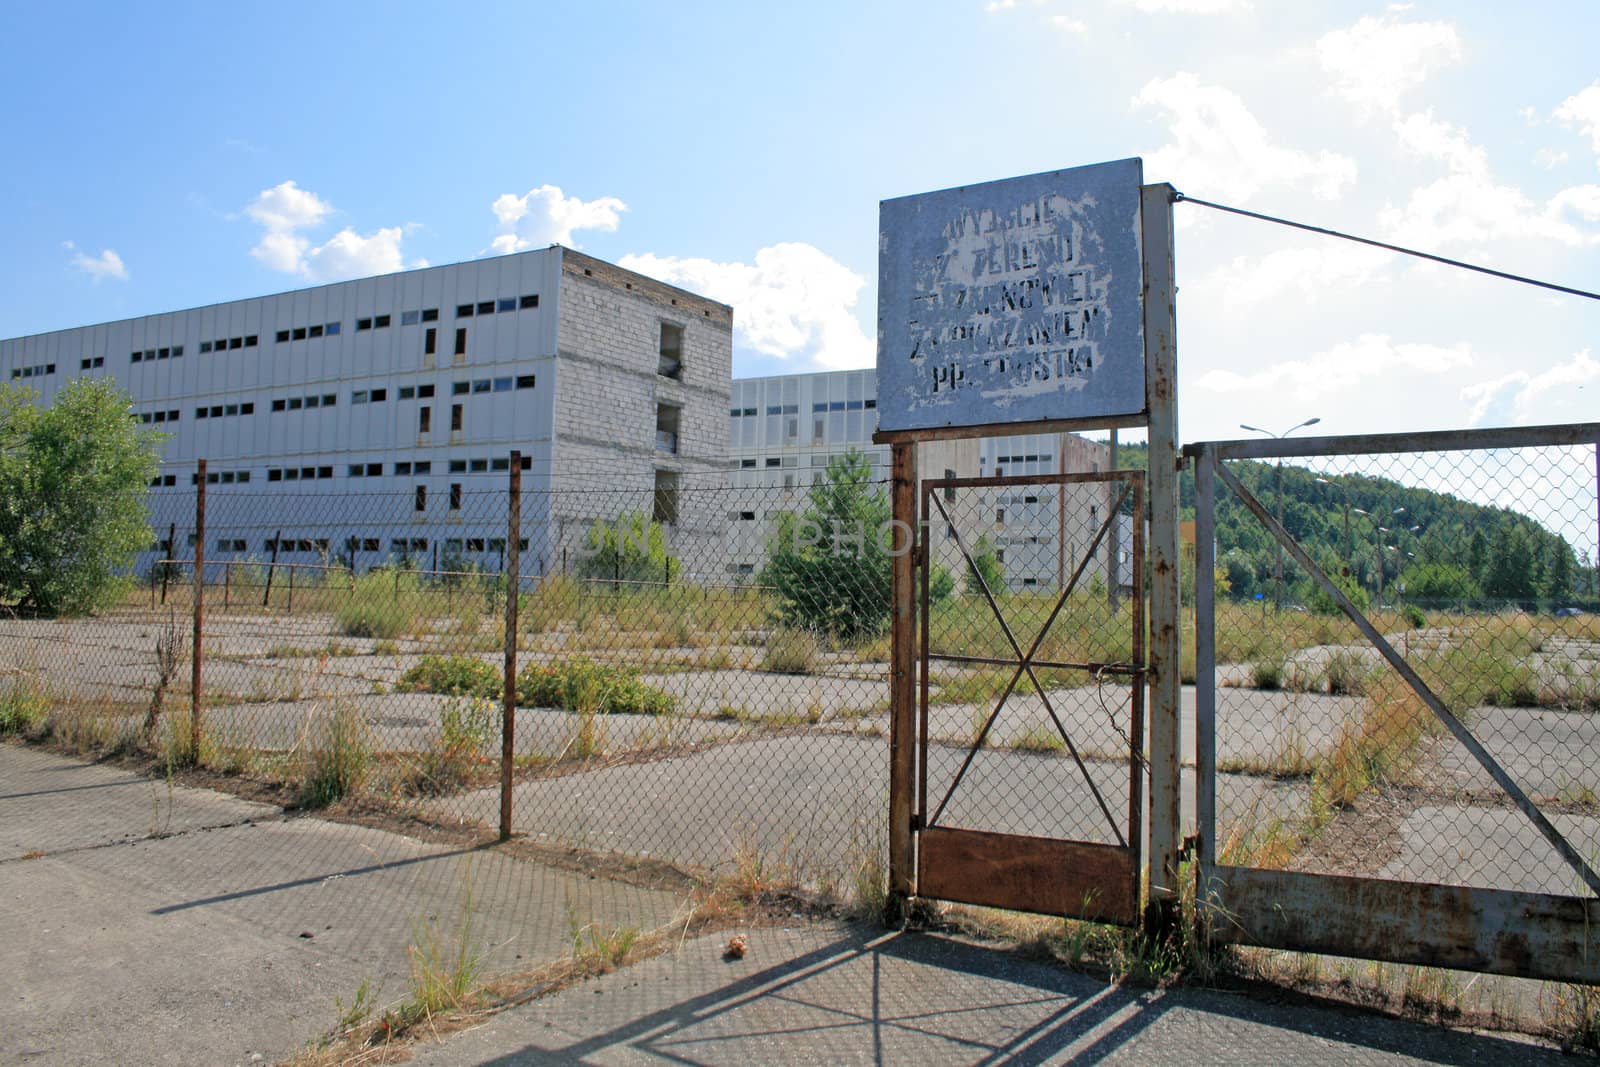 Gate to the unfinished nuclear power plant
